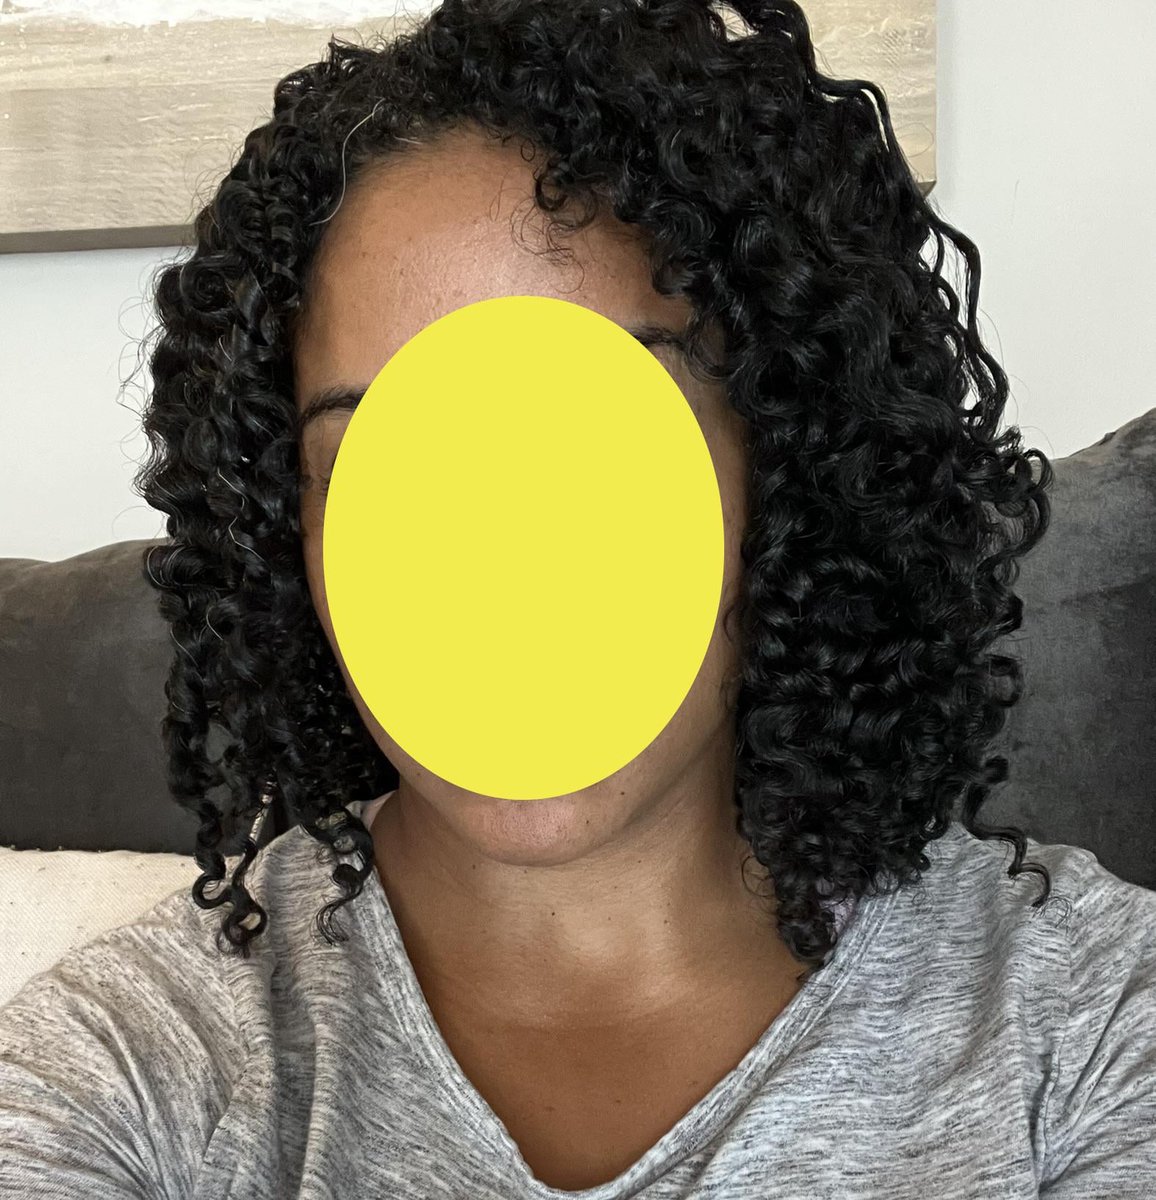 Reddit: Anyone else’s hair not like Ecoslay products? I tried it last week and my hair wouldn’t clump. I just did this wash and go with my normal products (as shown in the photos) and my hair is much happier.: submitted by  /u/No_Trash_5989  
 [link]… dlvr.it/SwKV5L